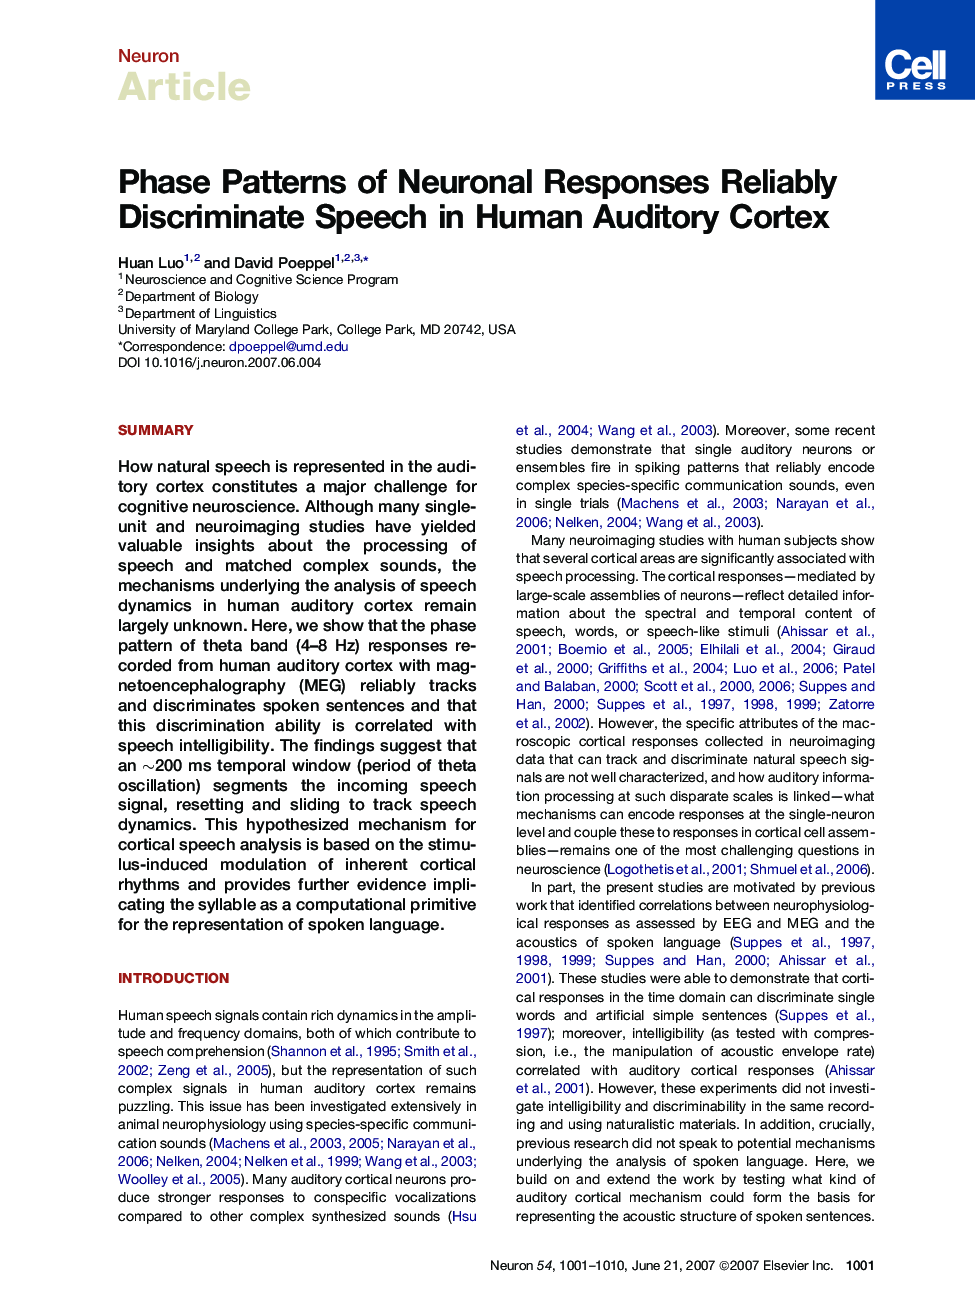 Phase Patterns of Neuronal Responses Reliably Discriminate Speech in Human Auditory Cortex